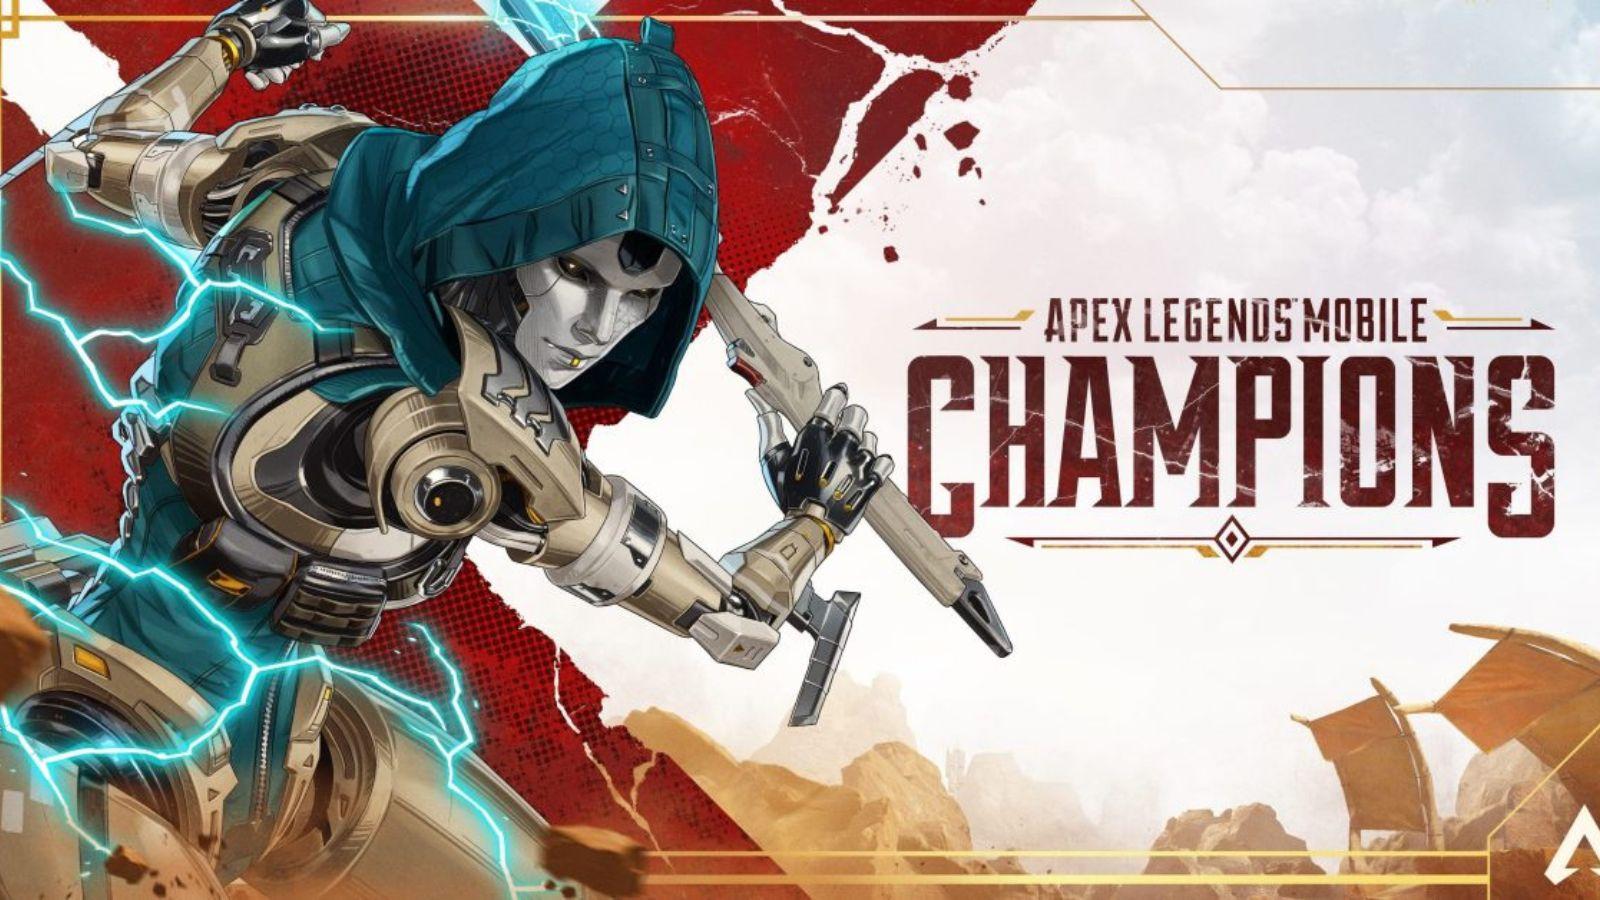 Apex Legends Mobile Season 2: Distortion is out now